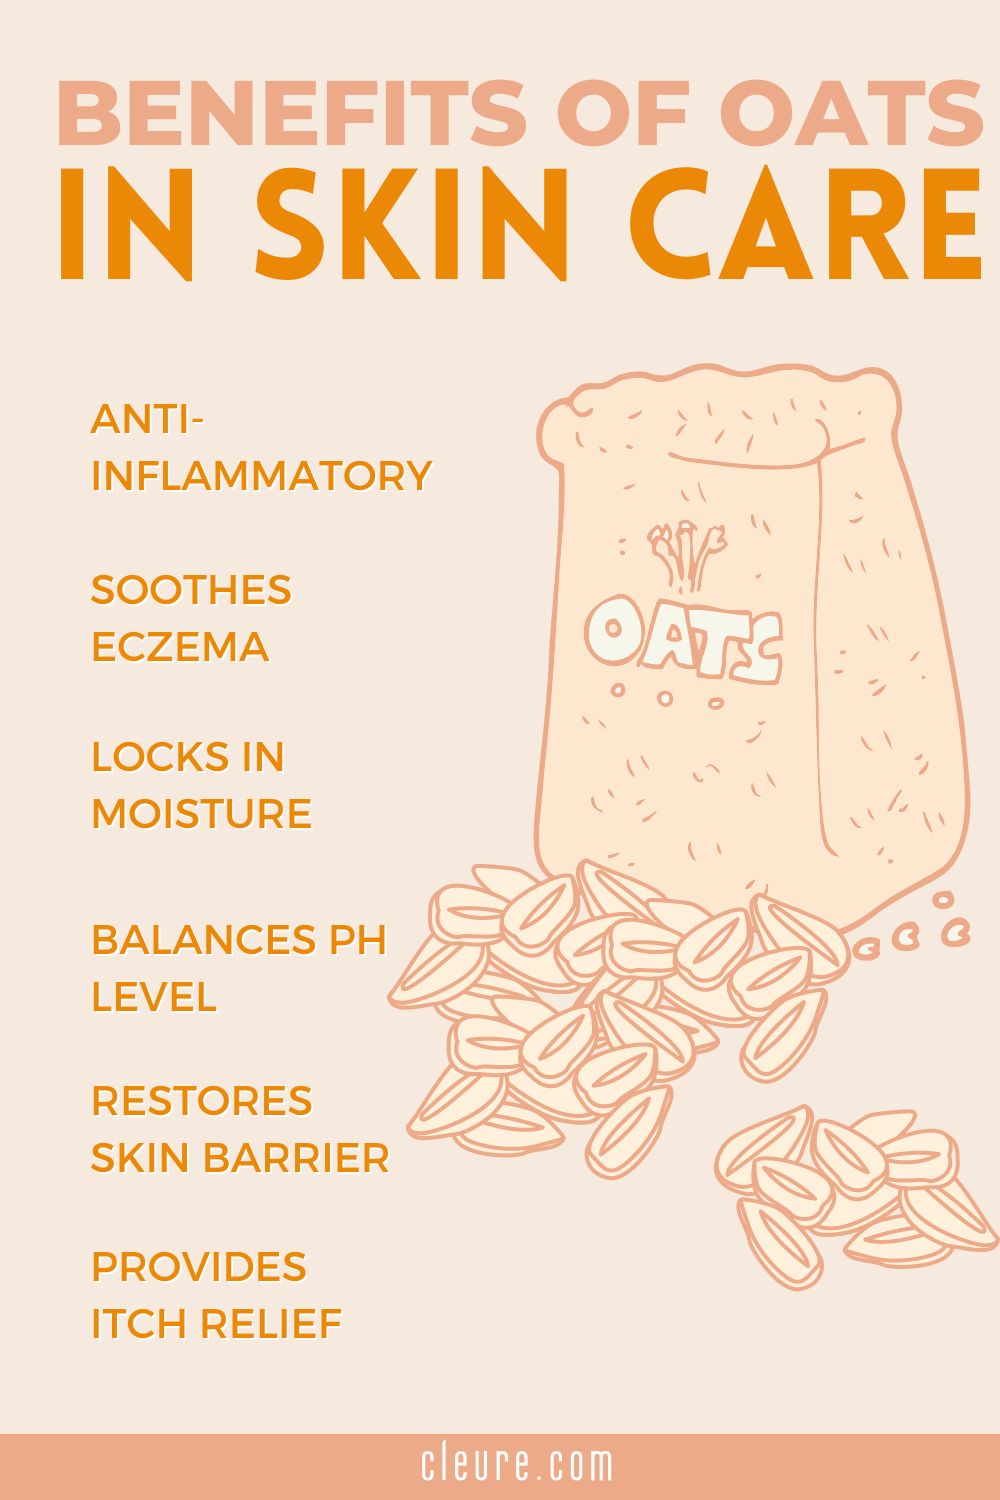 benefits of oats in skin care infographic - Cleure